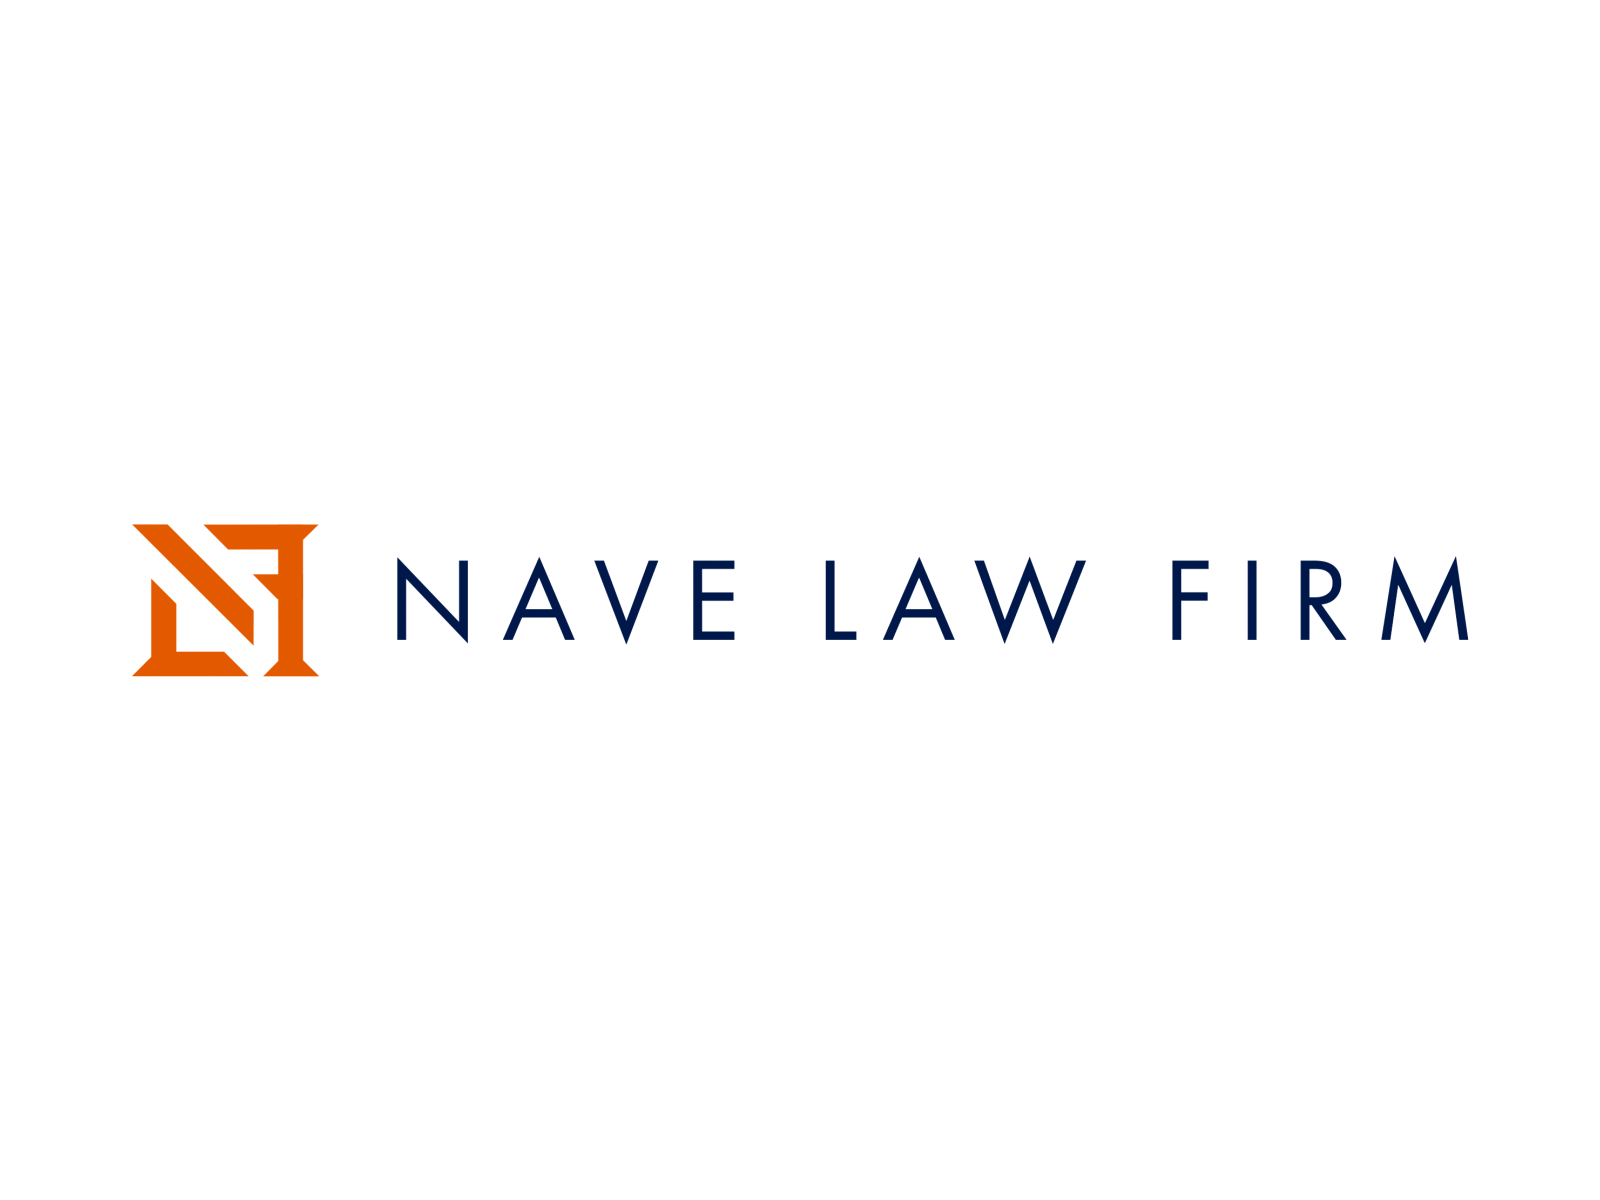 Nave Law Firm Logo Animation